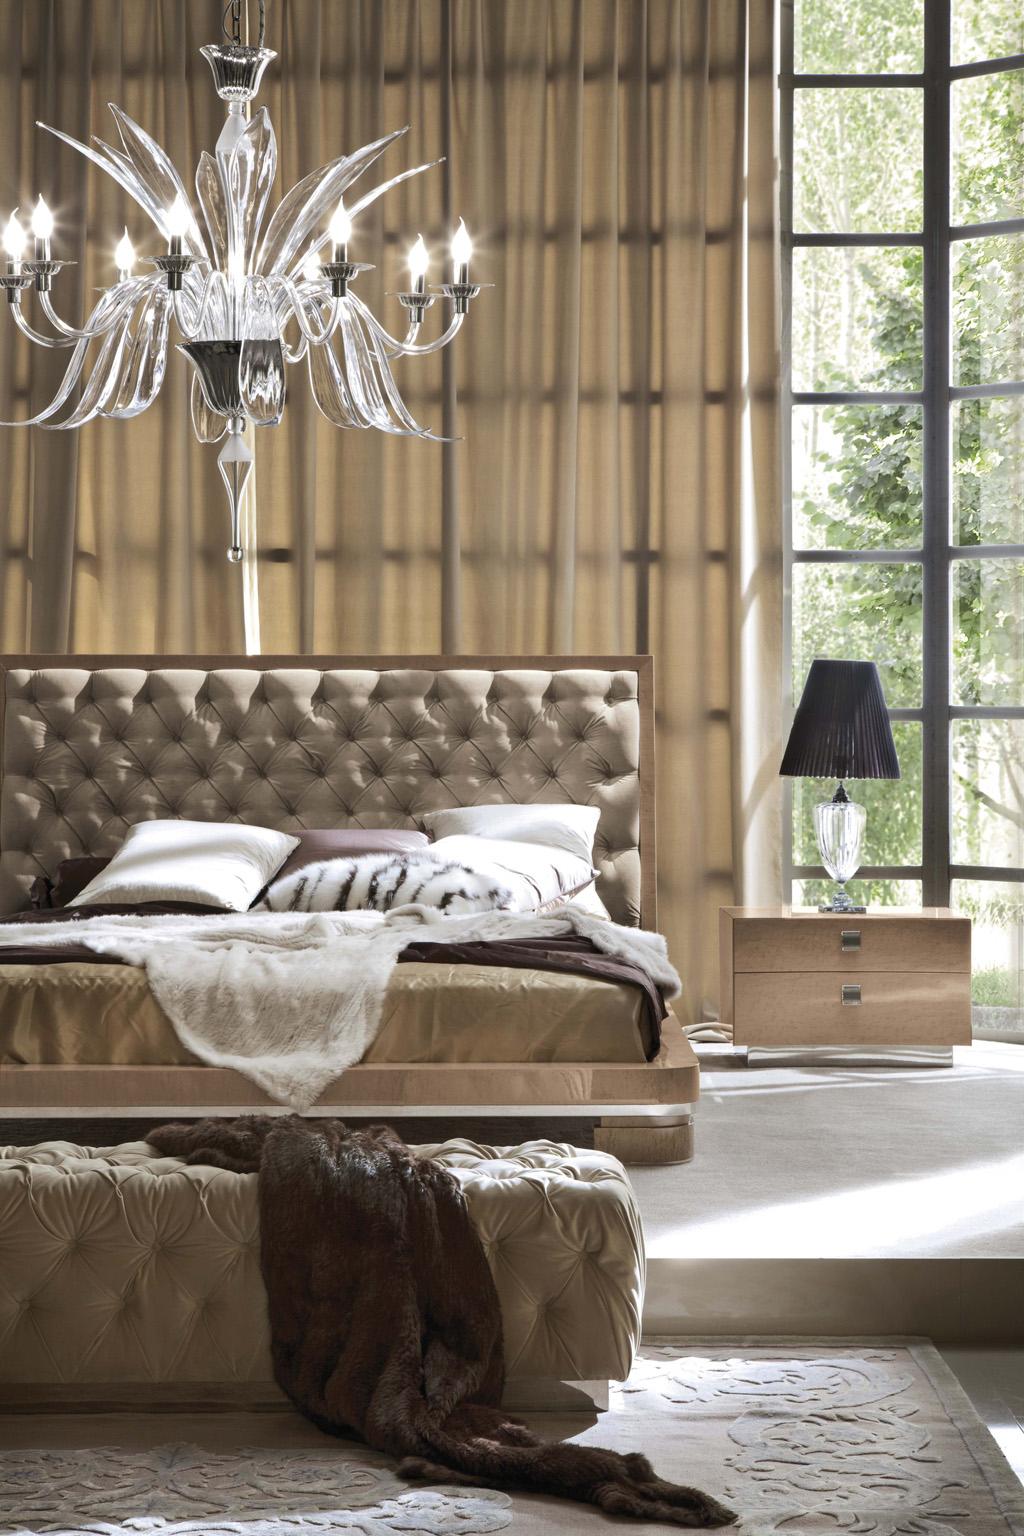 XXIe siècle et contemporain Giorgio Collection Tufted Upholstered Leather Headboard King Bed Sunrise en vente